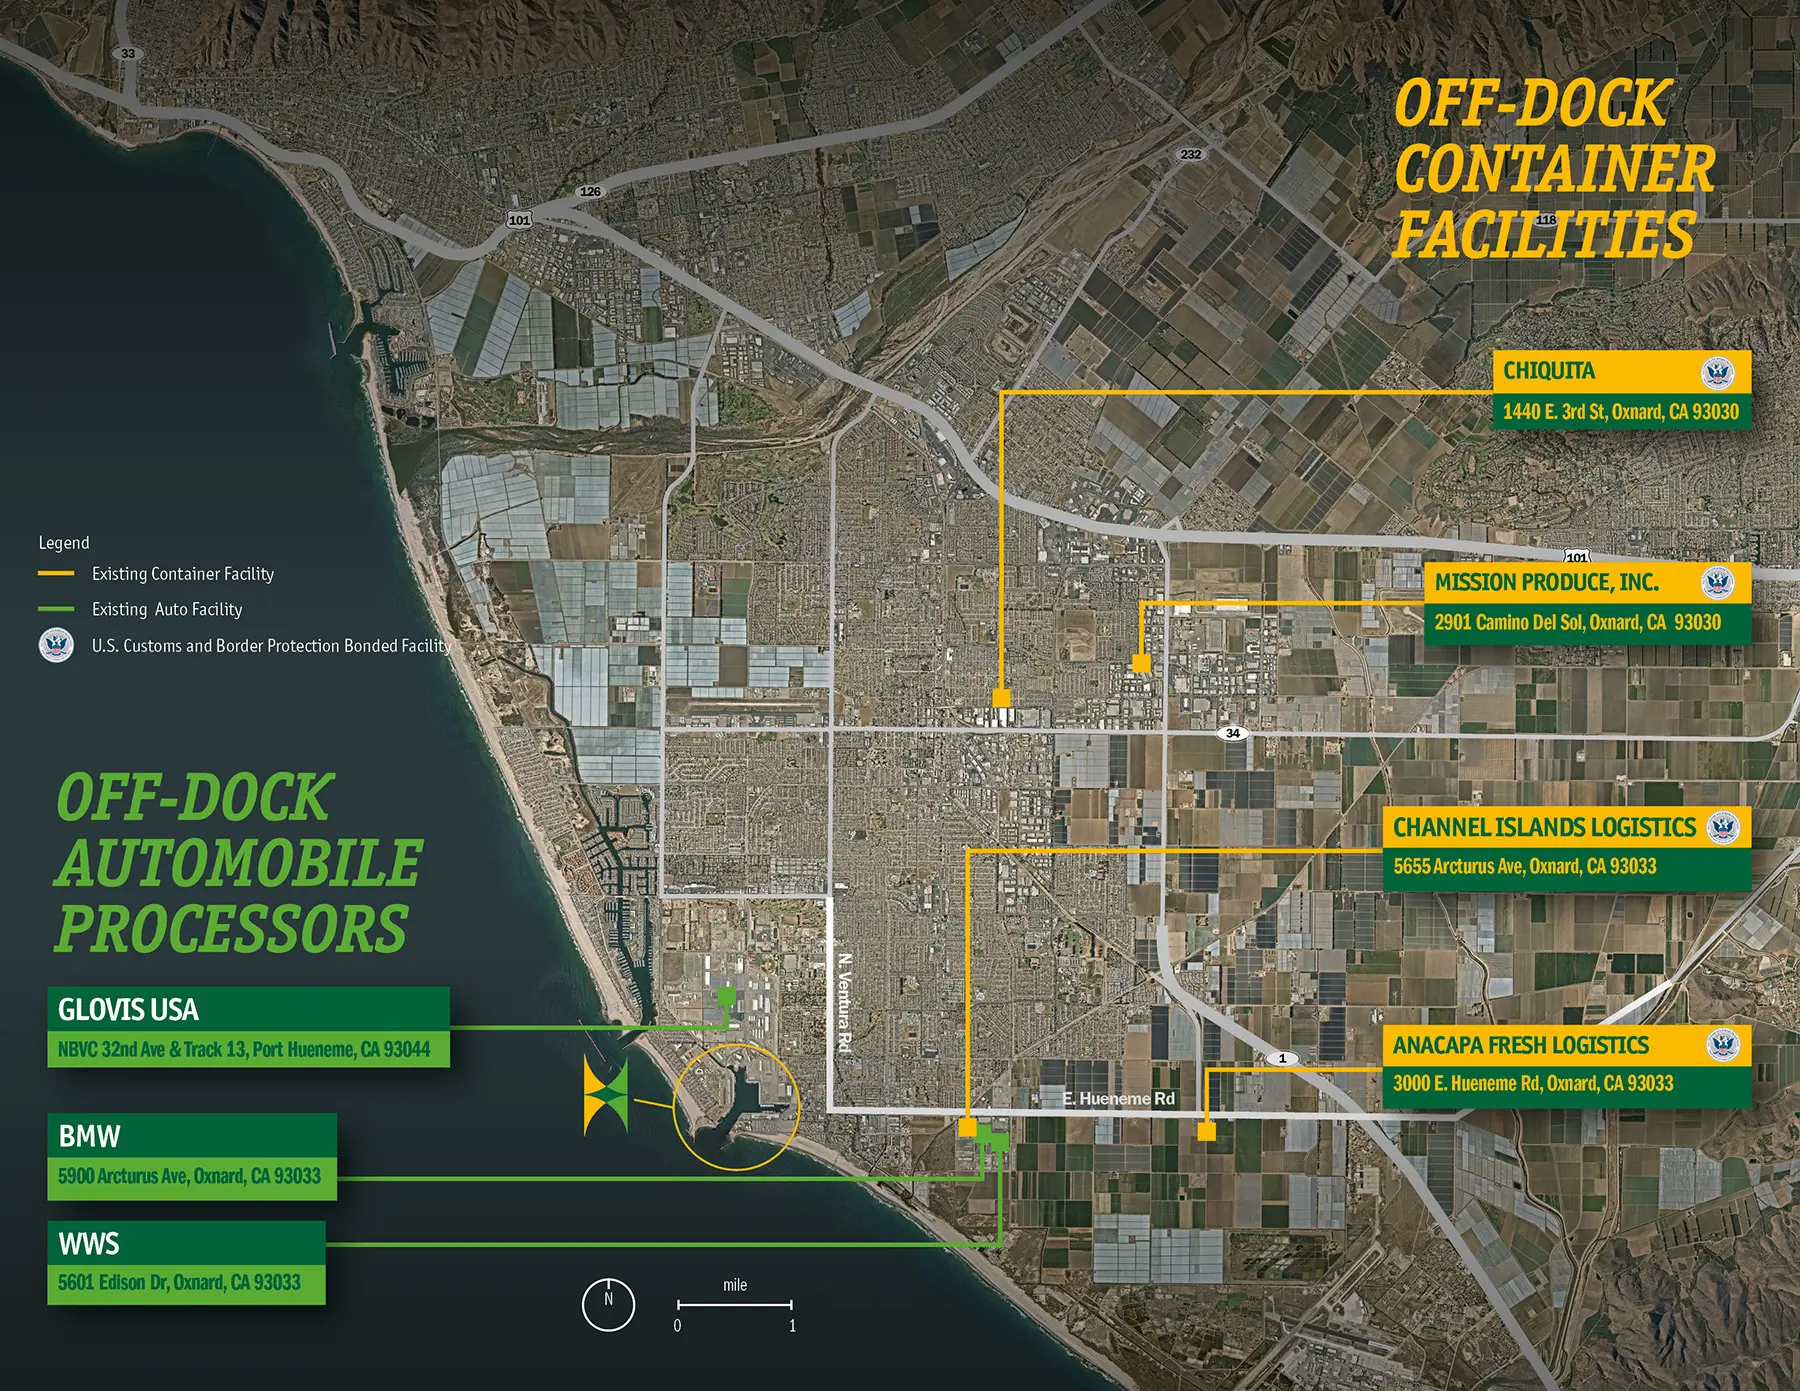 Map illustrating the strategic locations of off-dock container facilities and automobile processors in Oxnard, California. Each site is marked with its name and address, showcasing the advantages of each position.